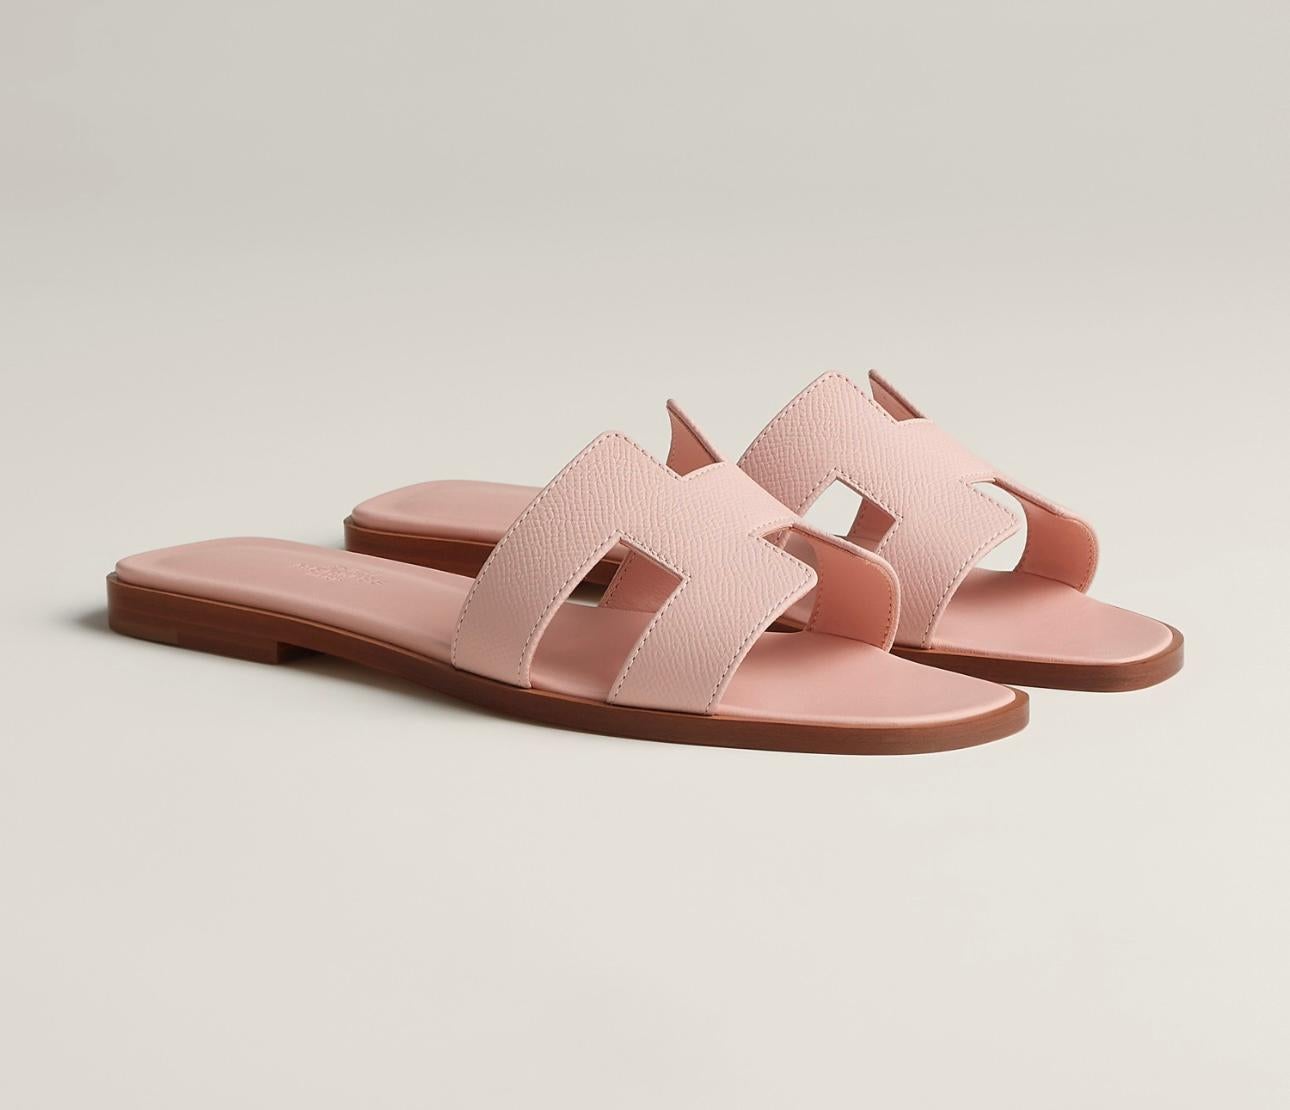 Hermes Oran Sandal in Rose Pâle colour Epsom calfskin leather with iconic 